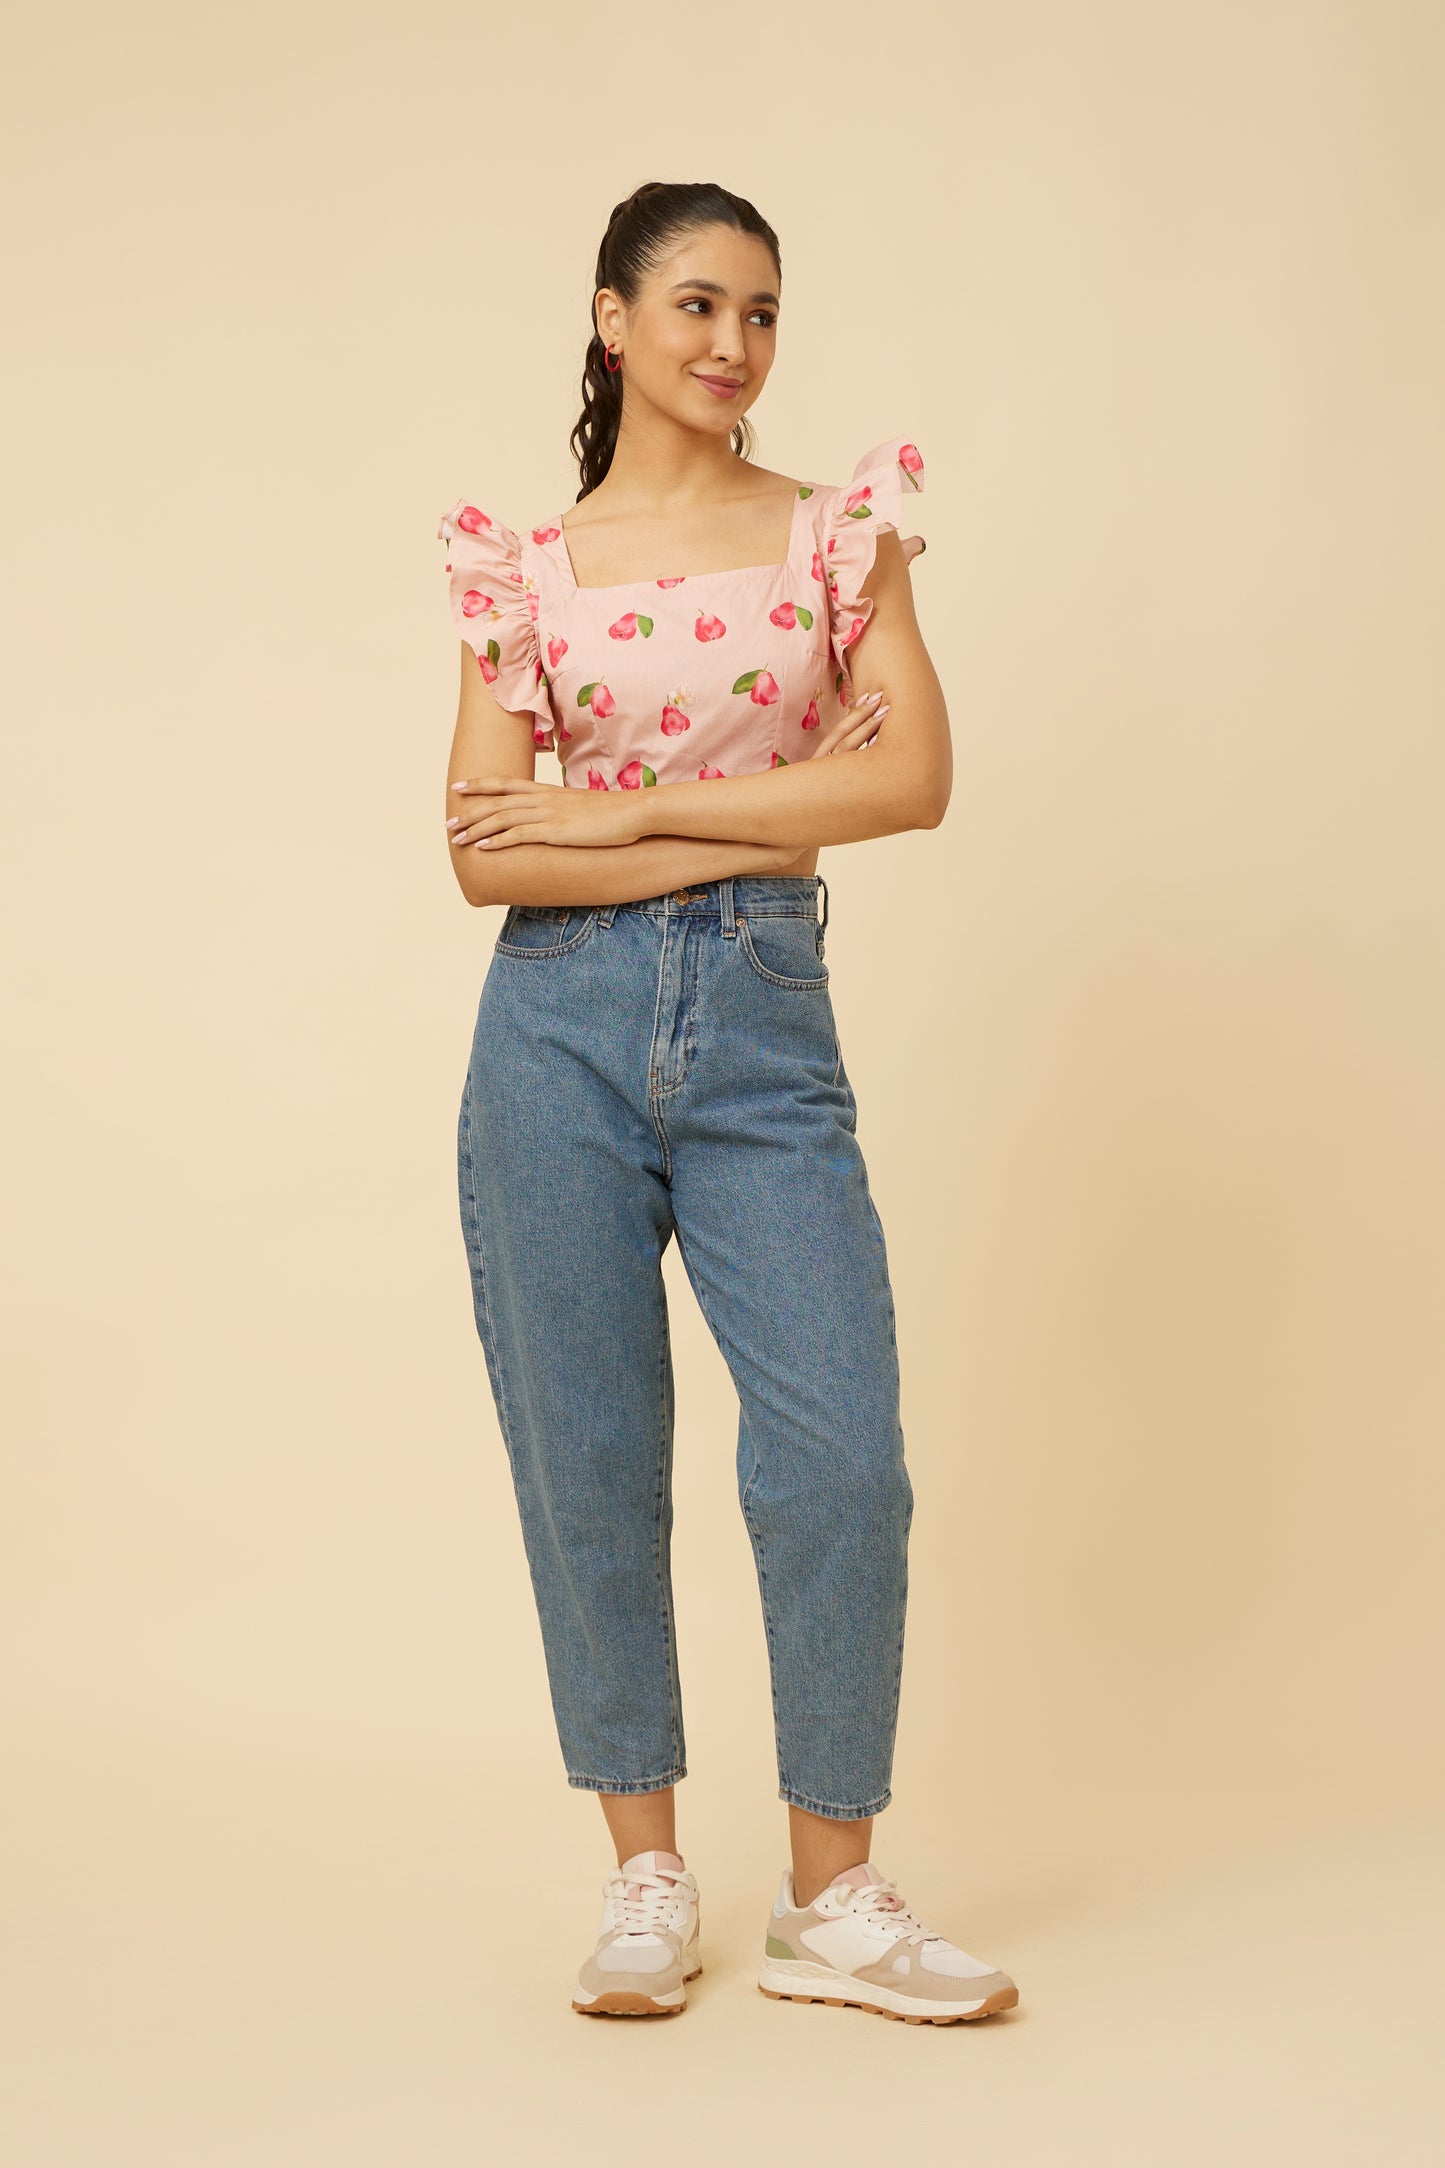 Confident woman standing in a Rose Apple Frill Crop Top featuring feminine shoulder frills and a sleeveless design, complemented by casual denim pants